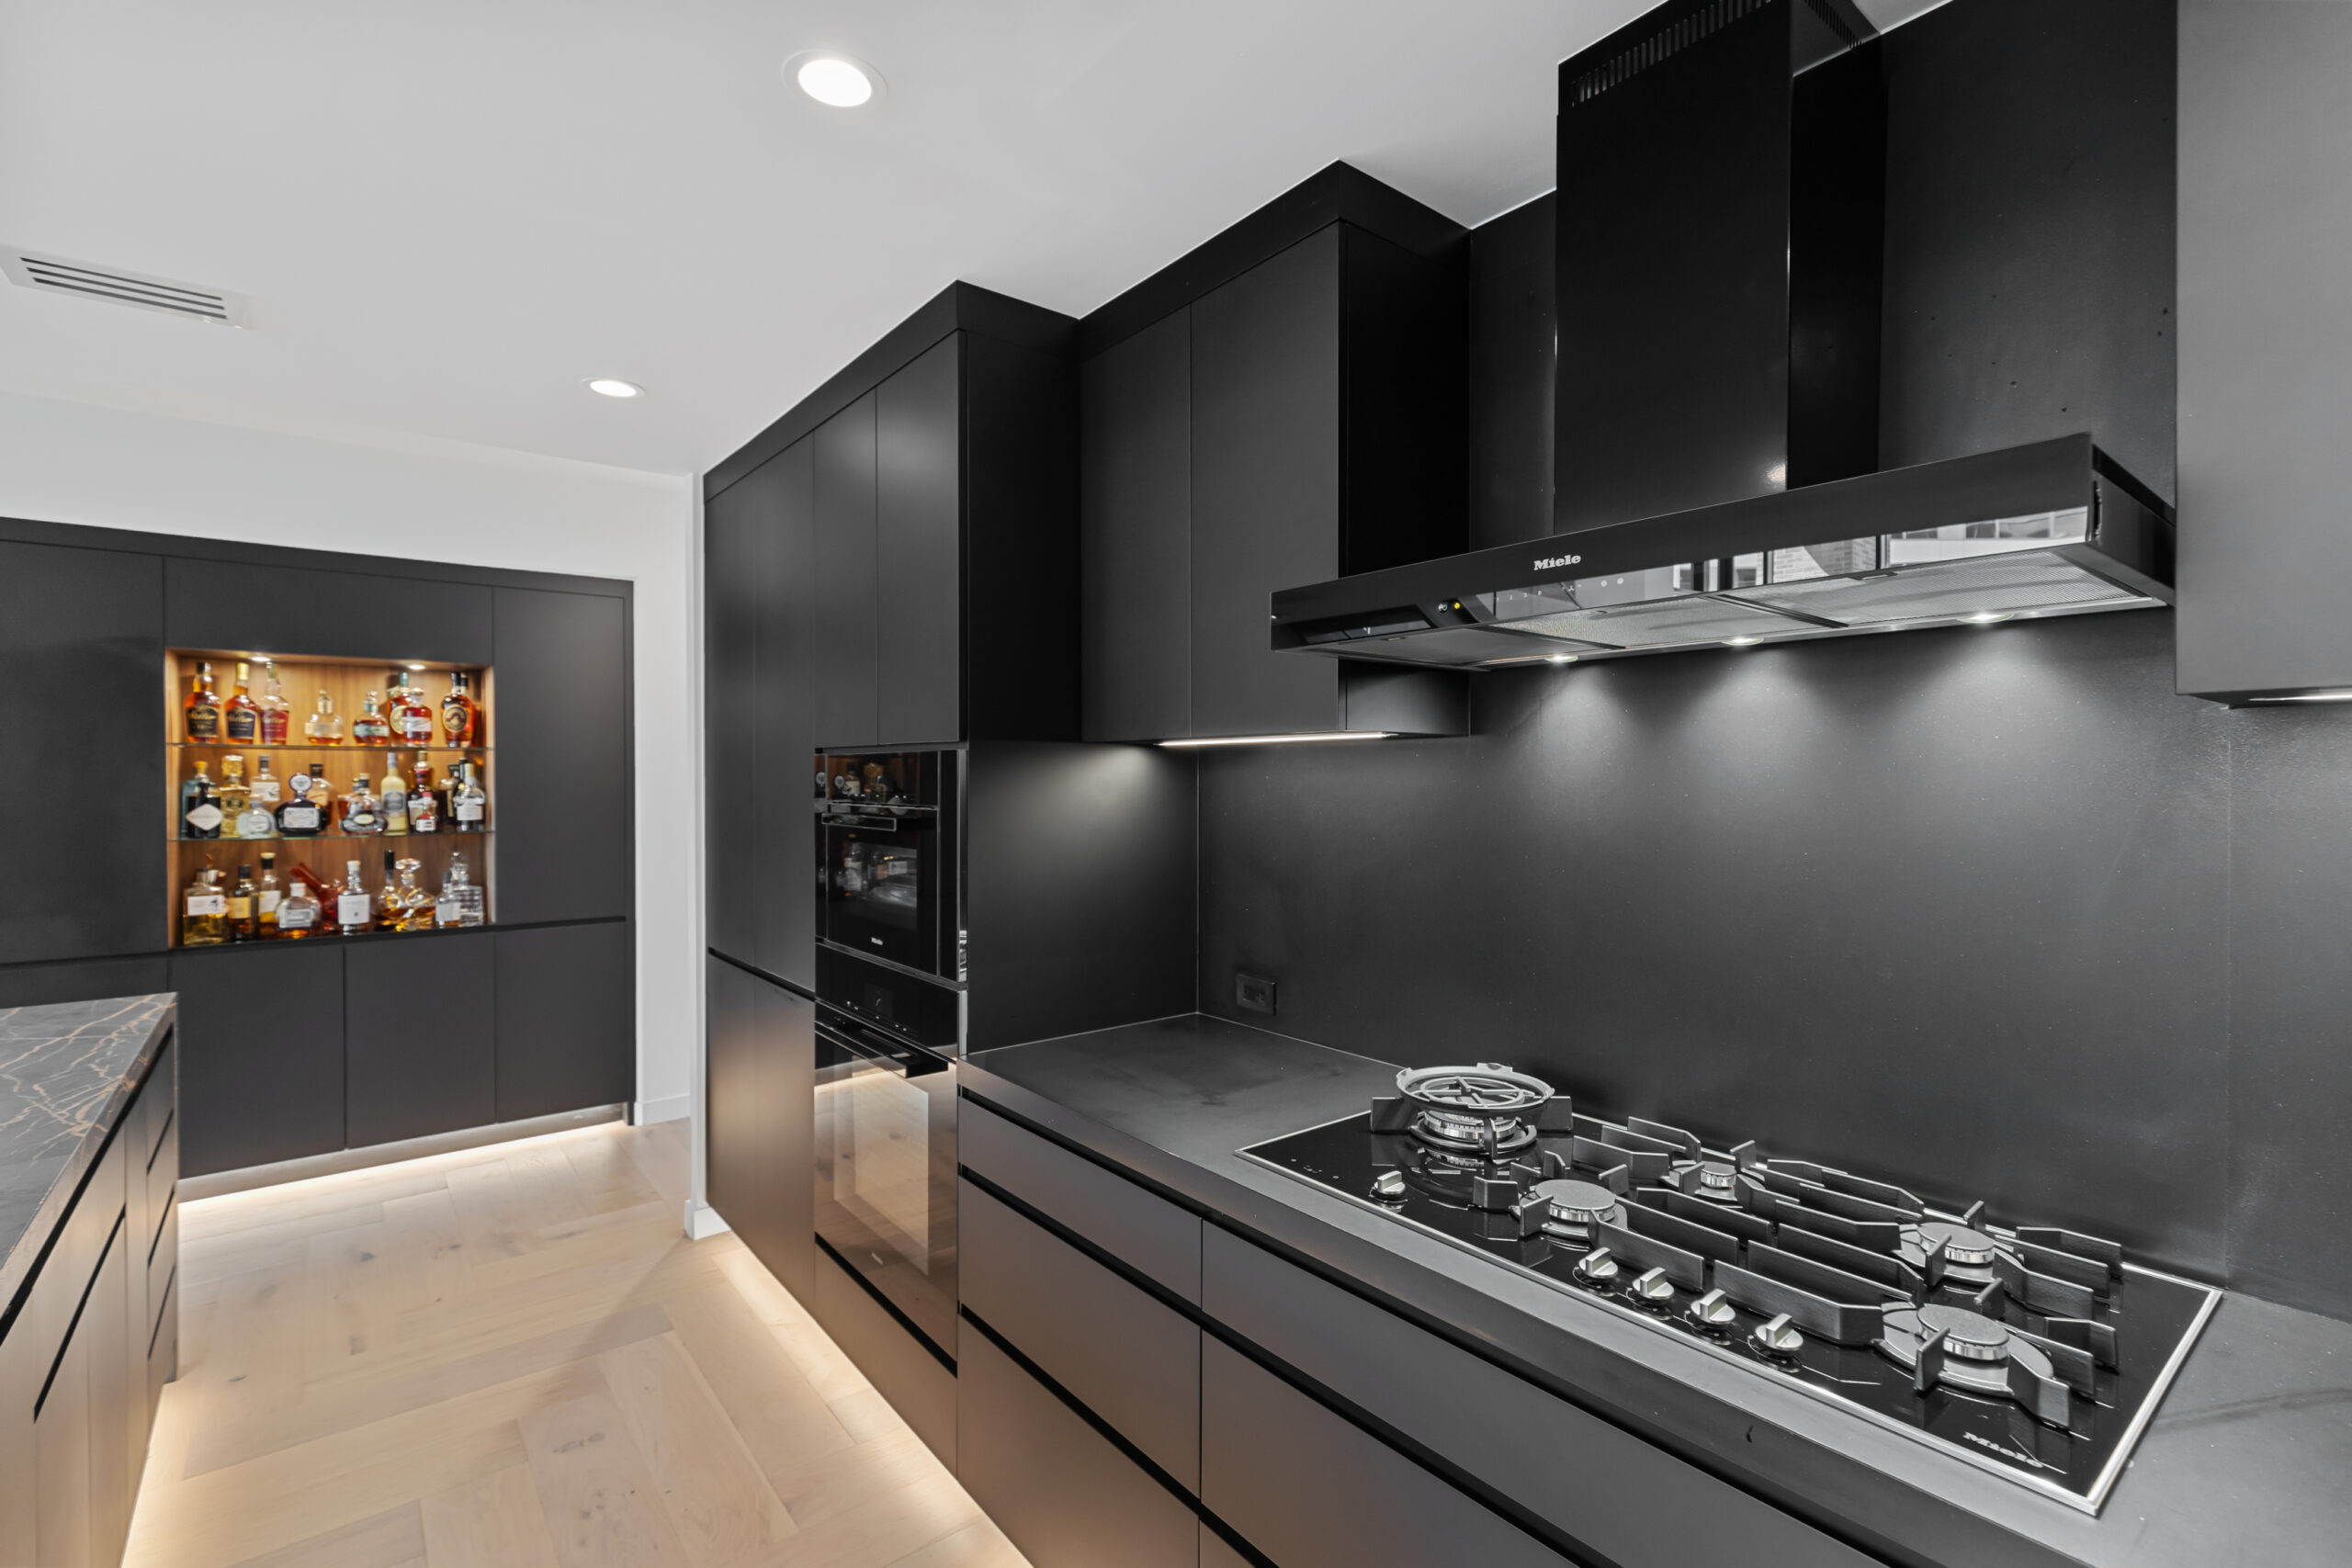 State-of-the-art urban kitchen with no-hardware cabinetry and built-in appliances by StyleCraft Dallas